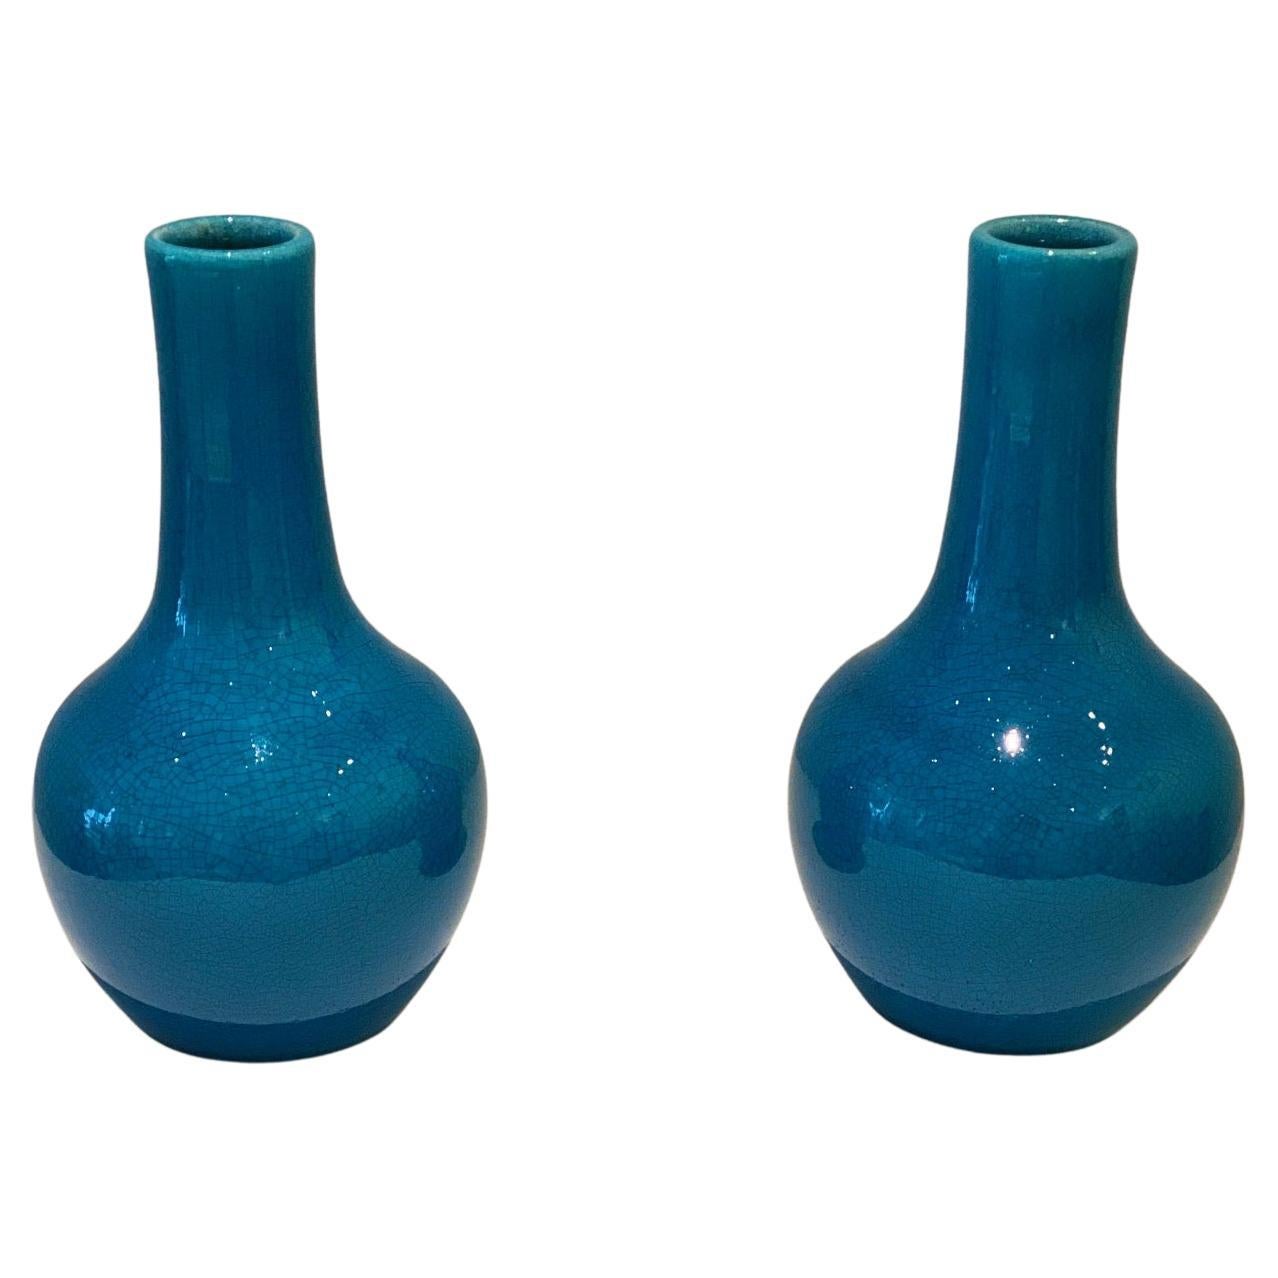 Pol Chambost 1970's Pair of Blue Ceramic Small Vases For Sale